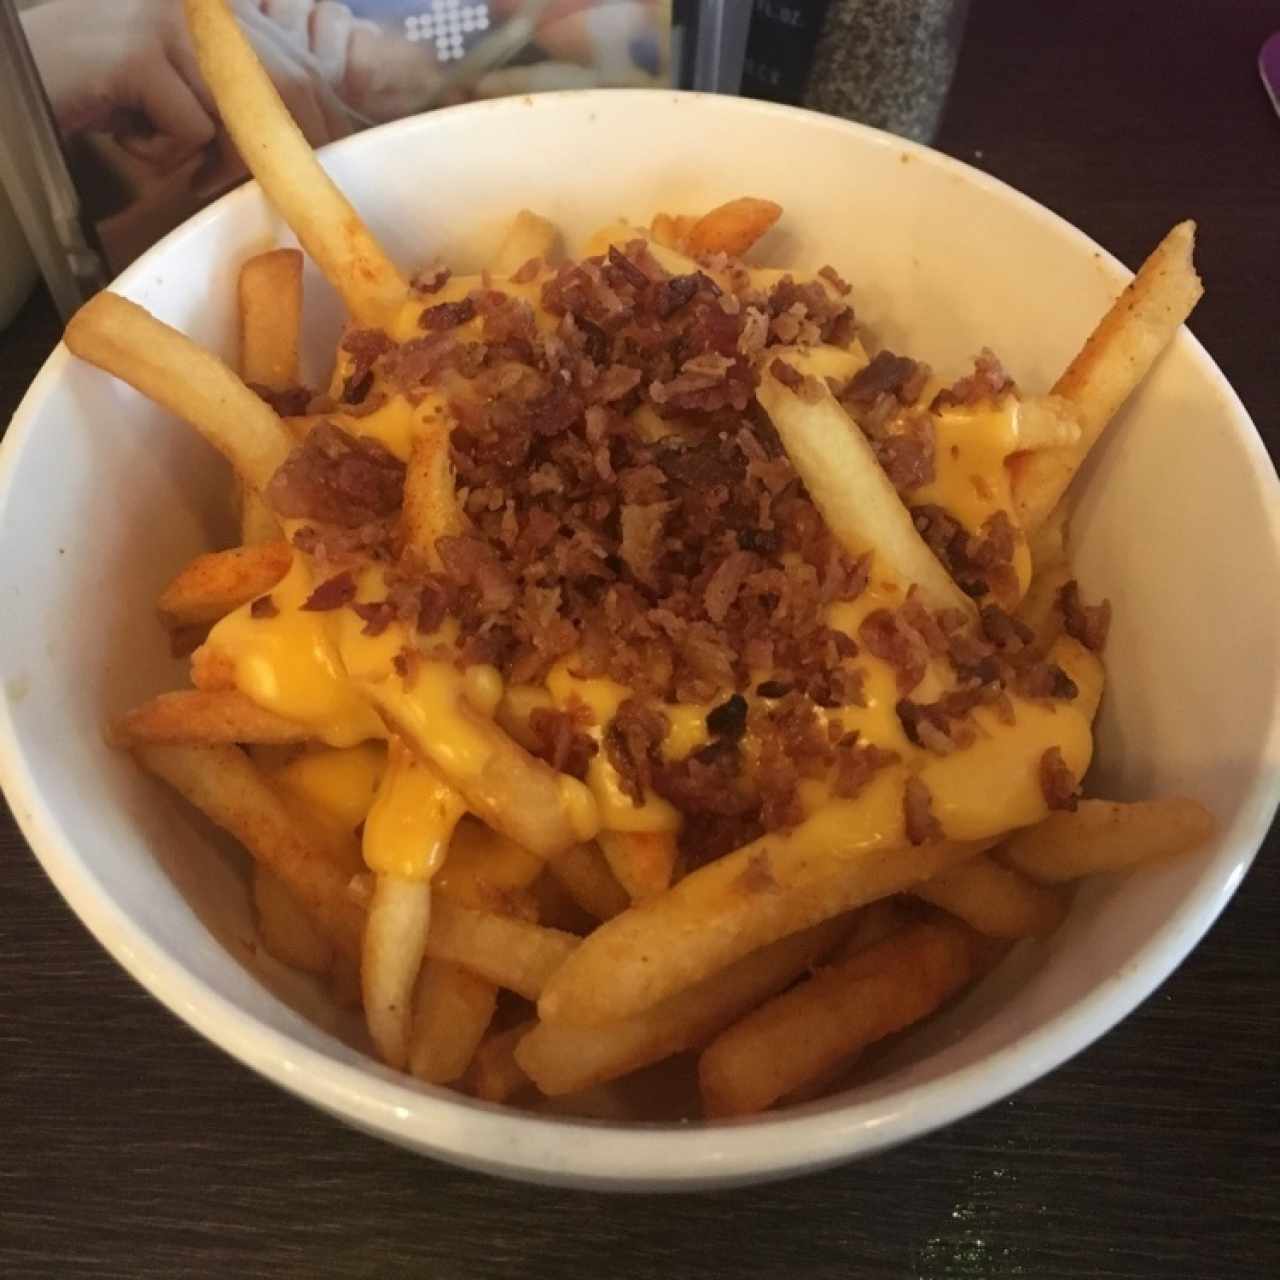 Cheese and bacon fries